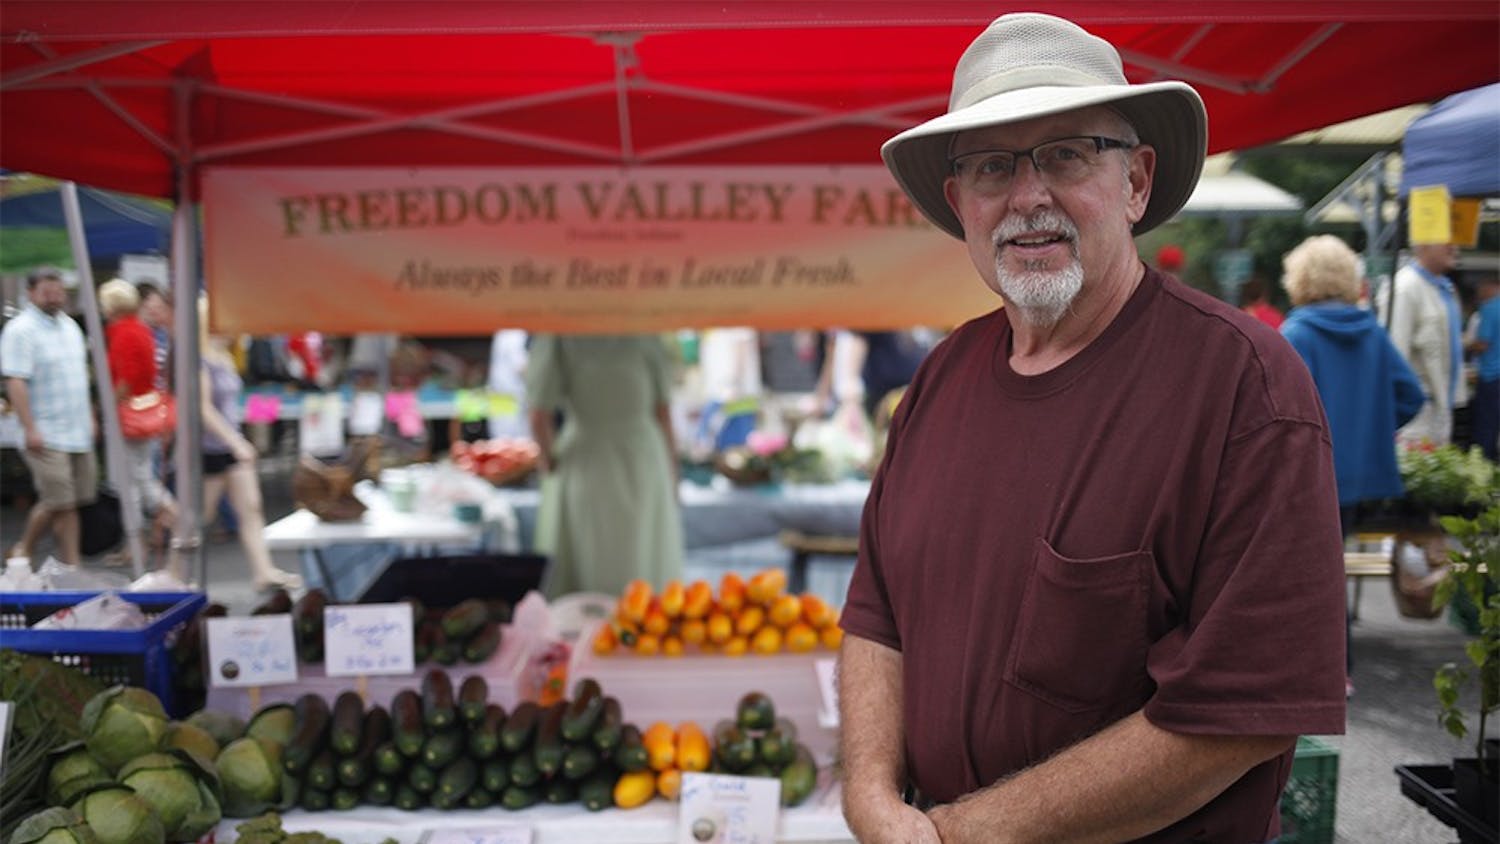 Jim Baughman stands in from of his "Freedom Valley Farms" tent at the Bloomington Community Farmers' Market on Saturday.  Baughman has owned and operated the farm with his brother for five years.    